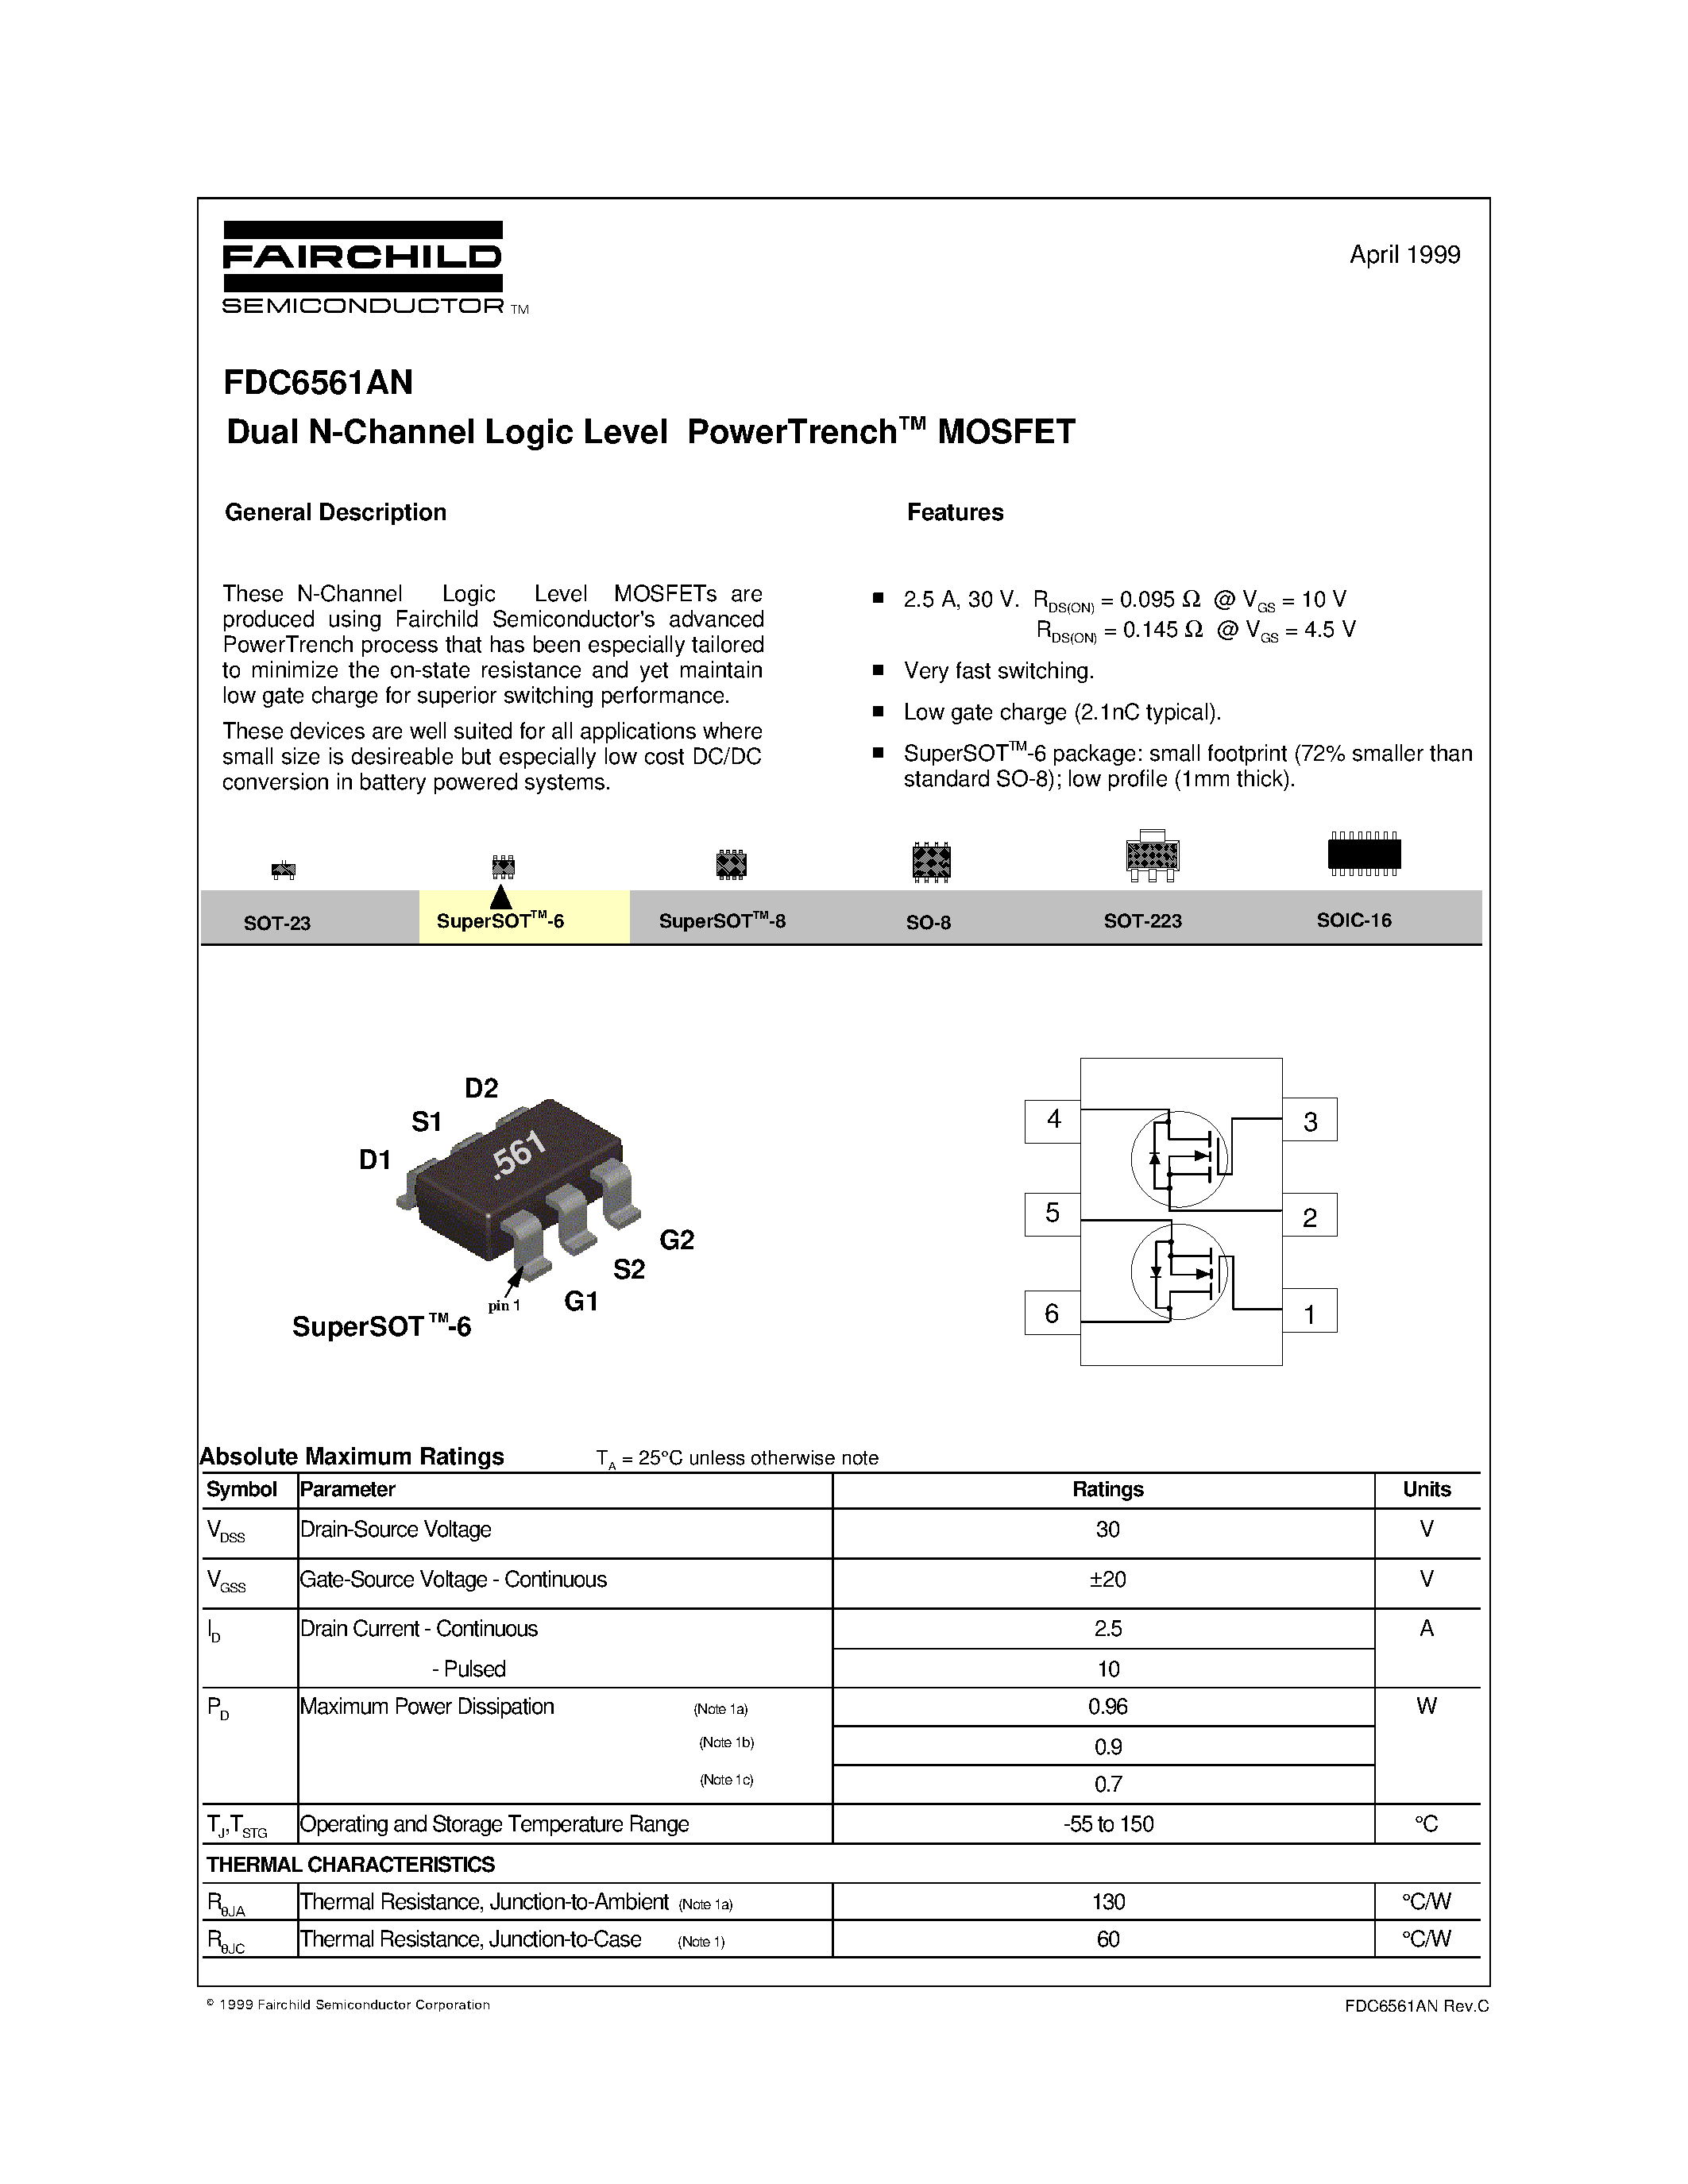 Datasheet FDC6561AN - Dual N-Channel Logic Level PowerTrenchTM MOSFET page 1